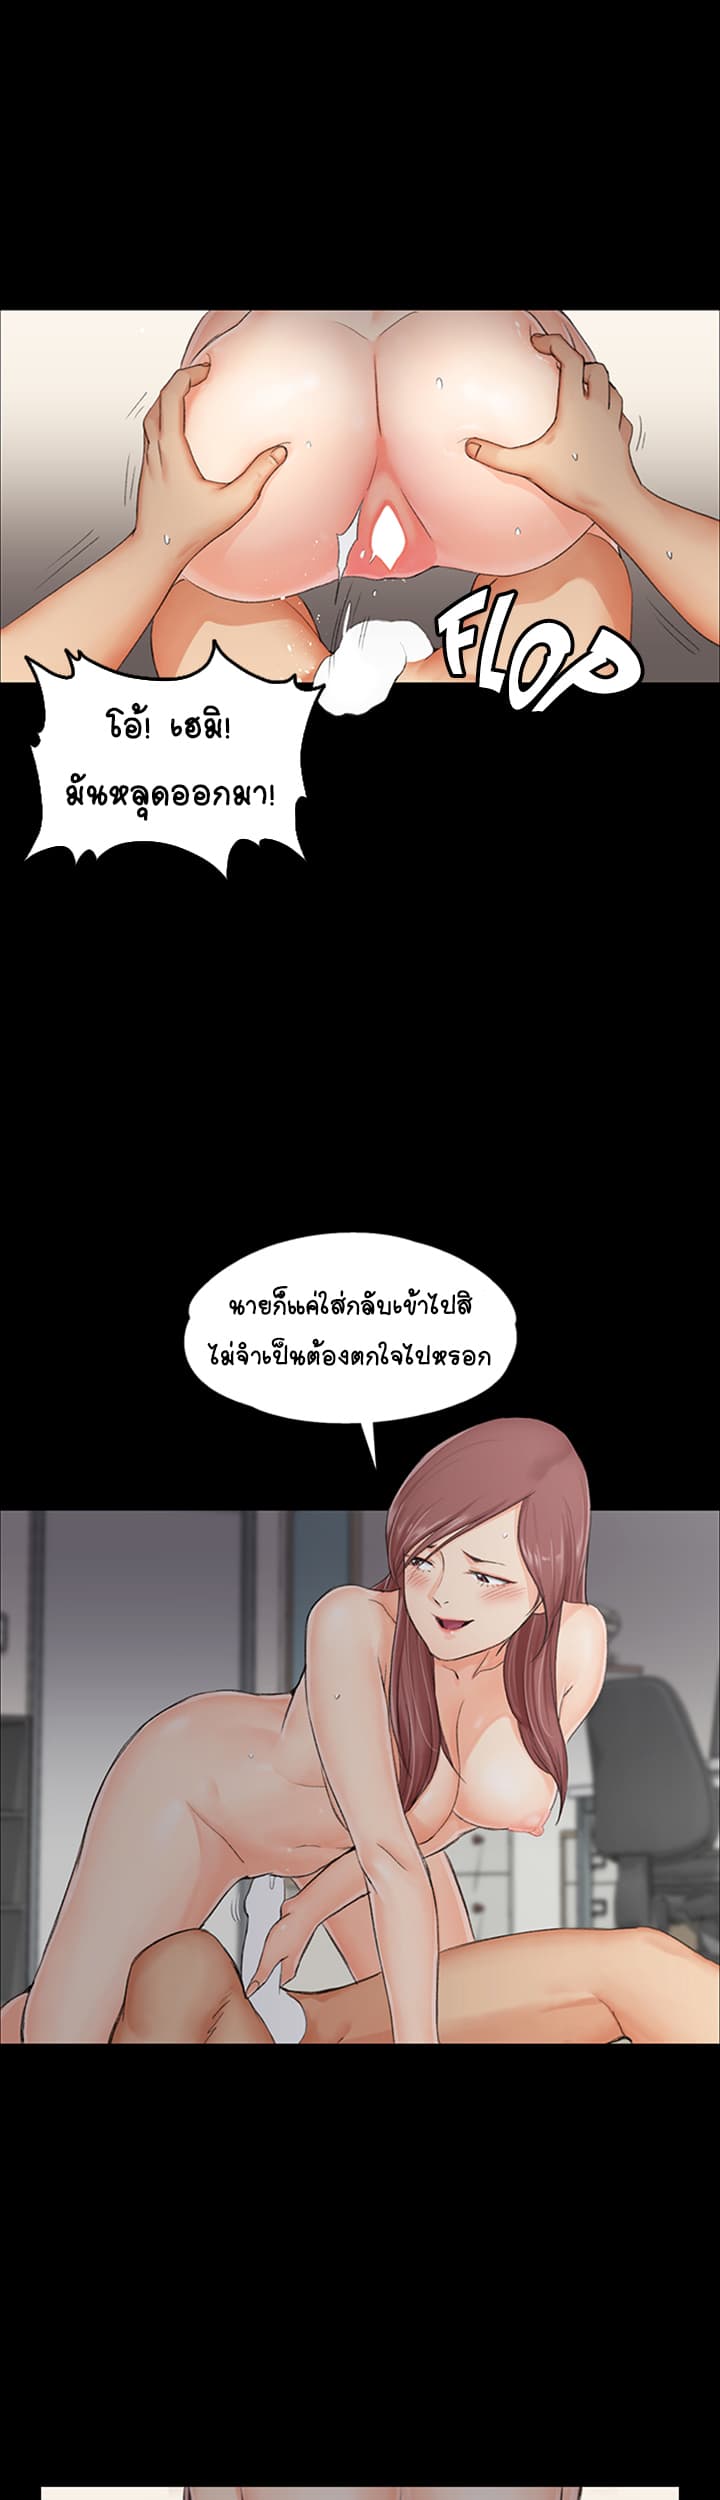 His Place - หน้า 36